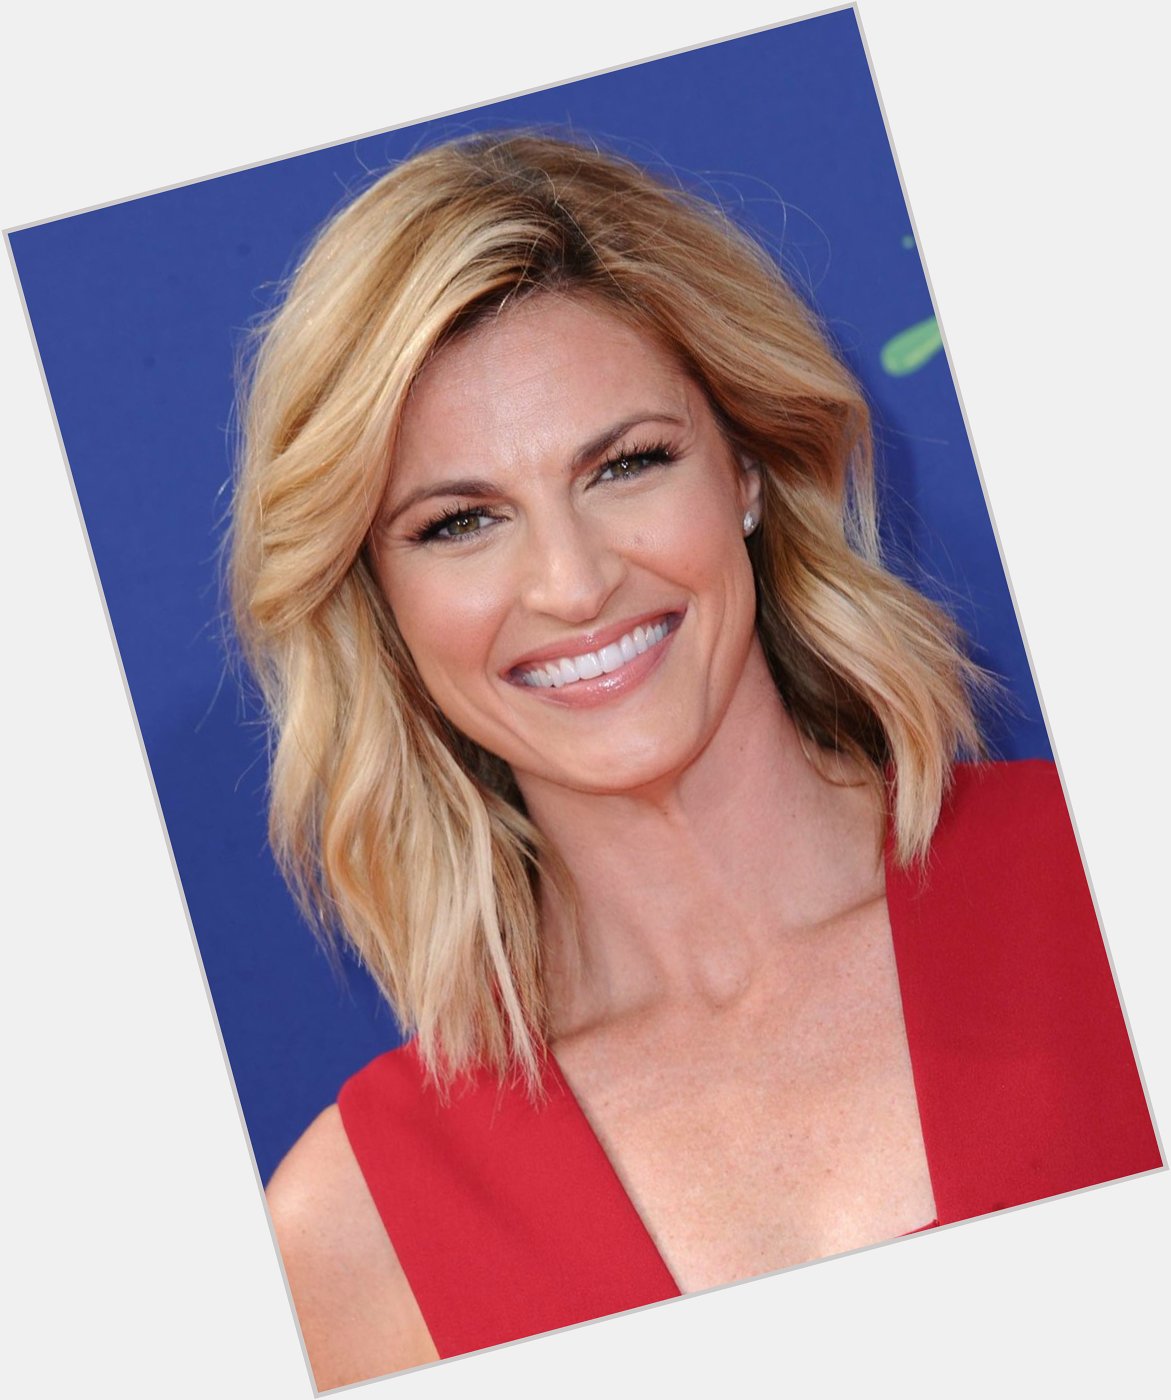 Happy 39th birthday to sportscaster and television personality Erin Andrews! Enjoy! 